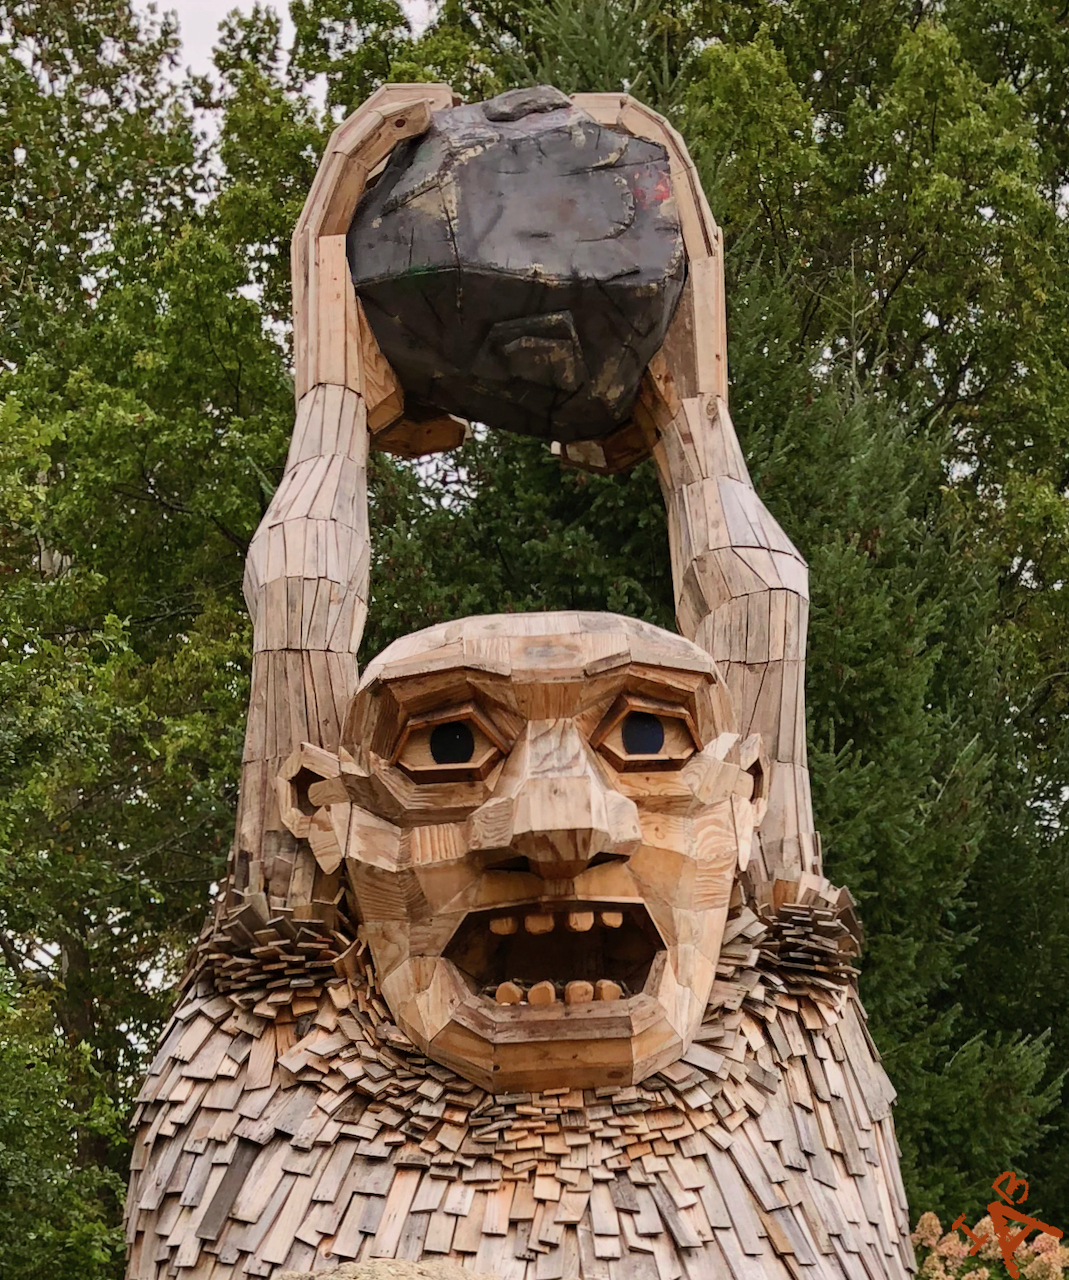 A troll at the Morton Arboretum holding a rock.